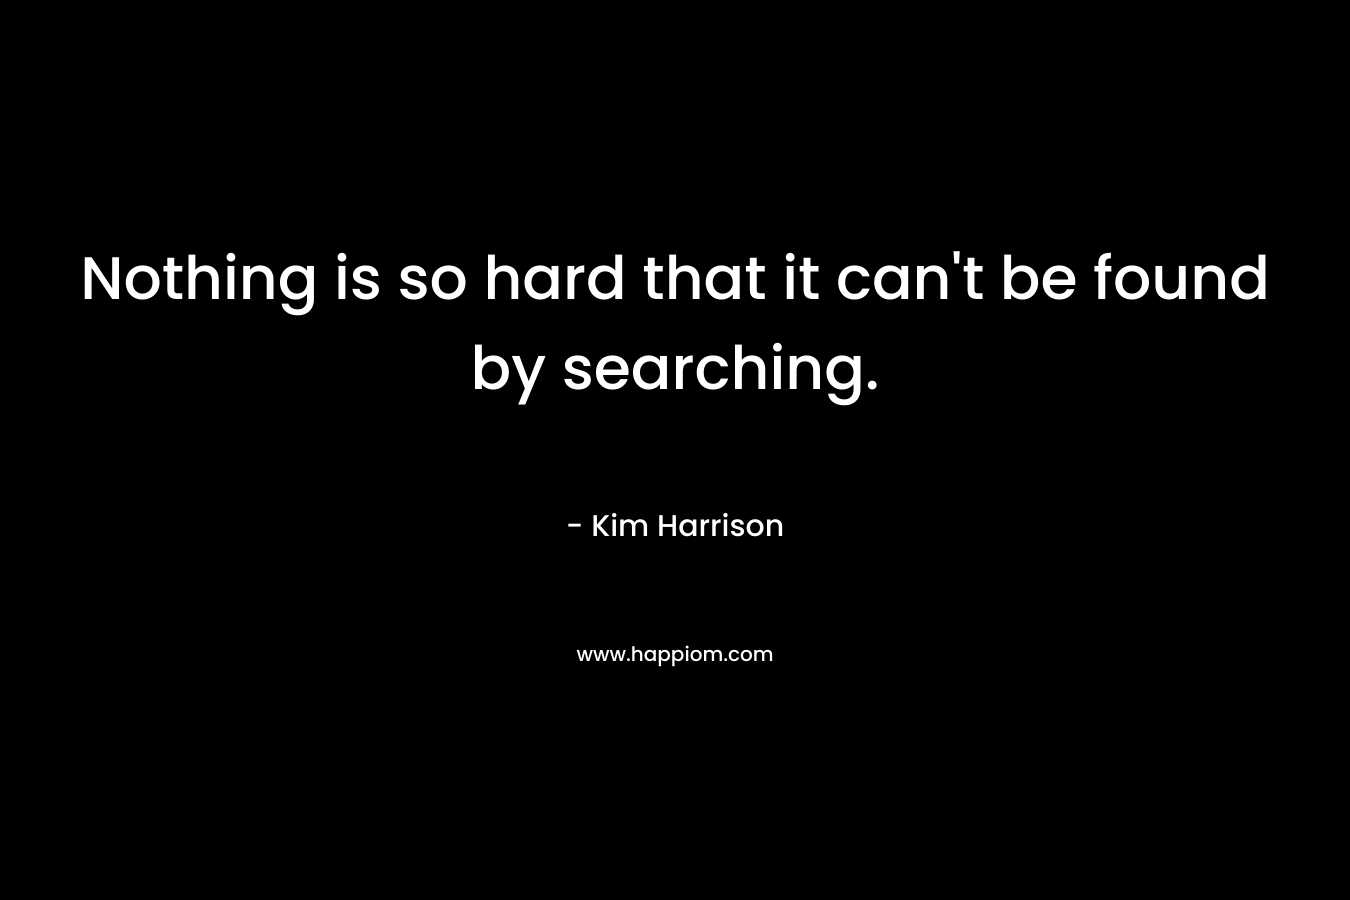 Nothing is so hard that it can’t be found by searching. – Kim Harrison